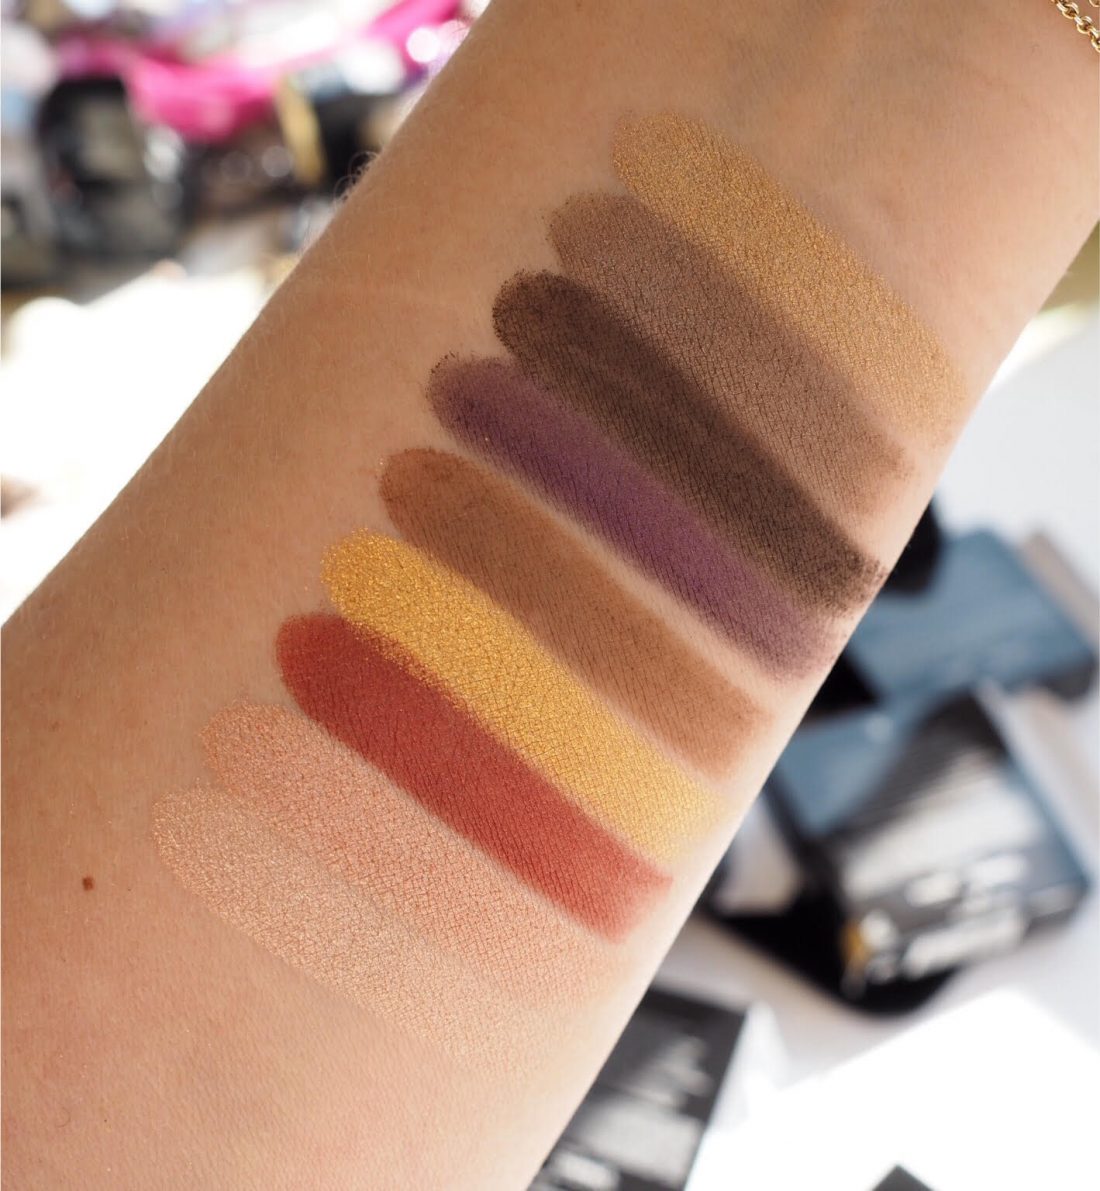 Chanel Ombre Premiere Swatches